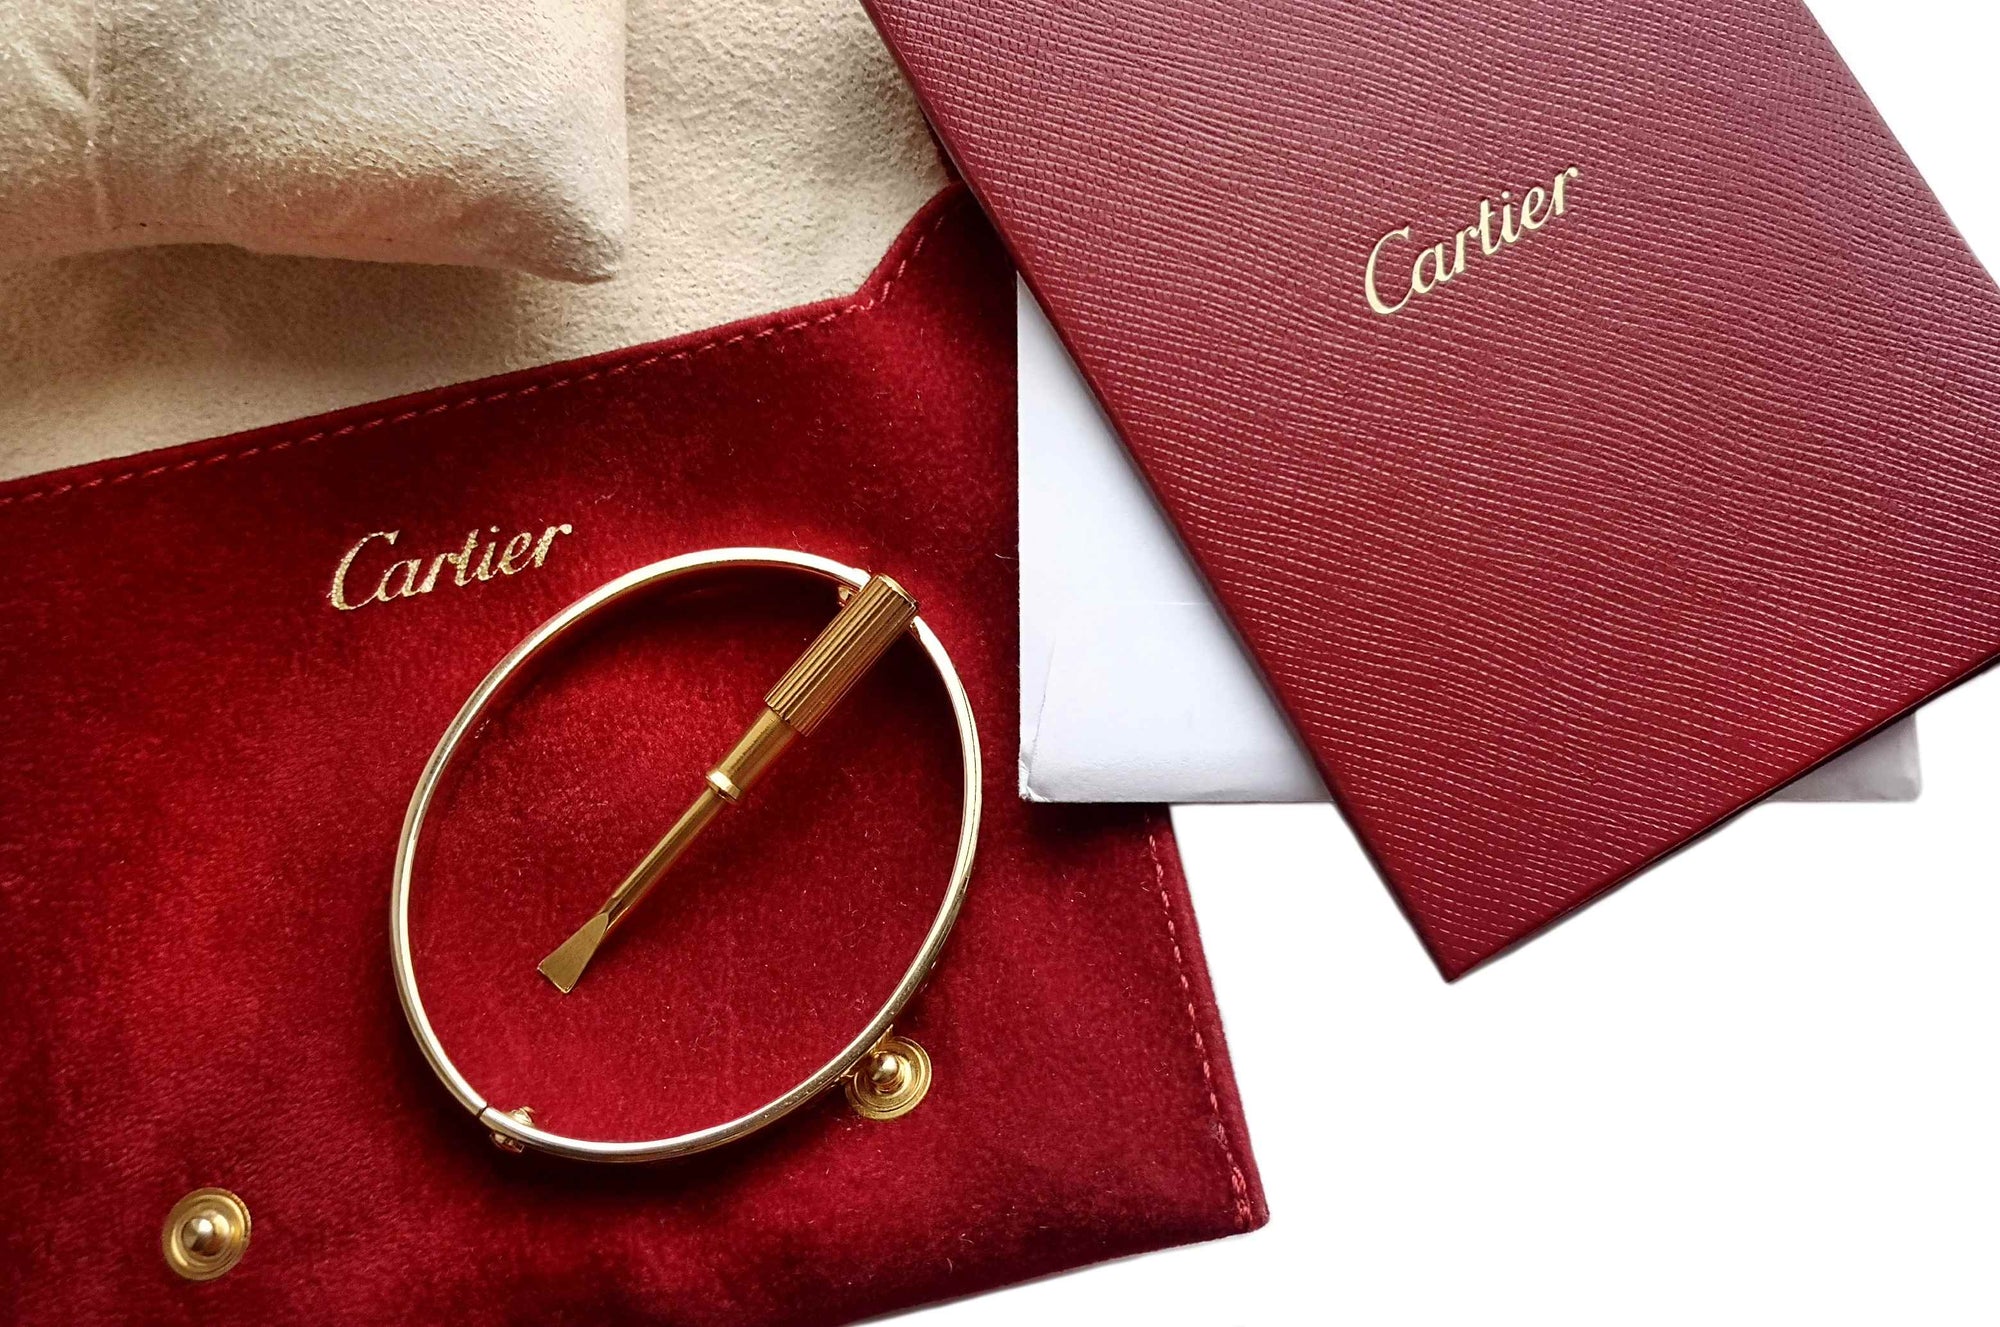 Cartier 18k Yellow Gold Love Bracelet with Certificate, Size 18